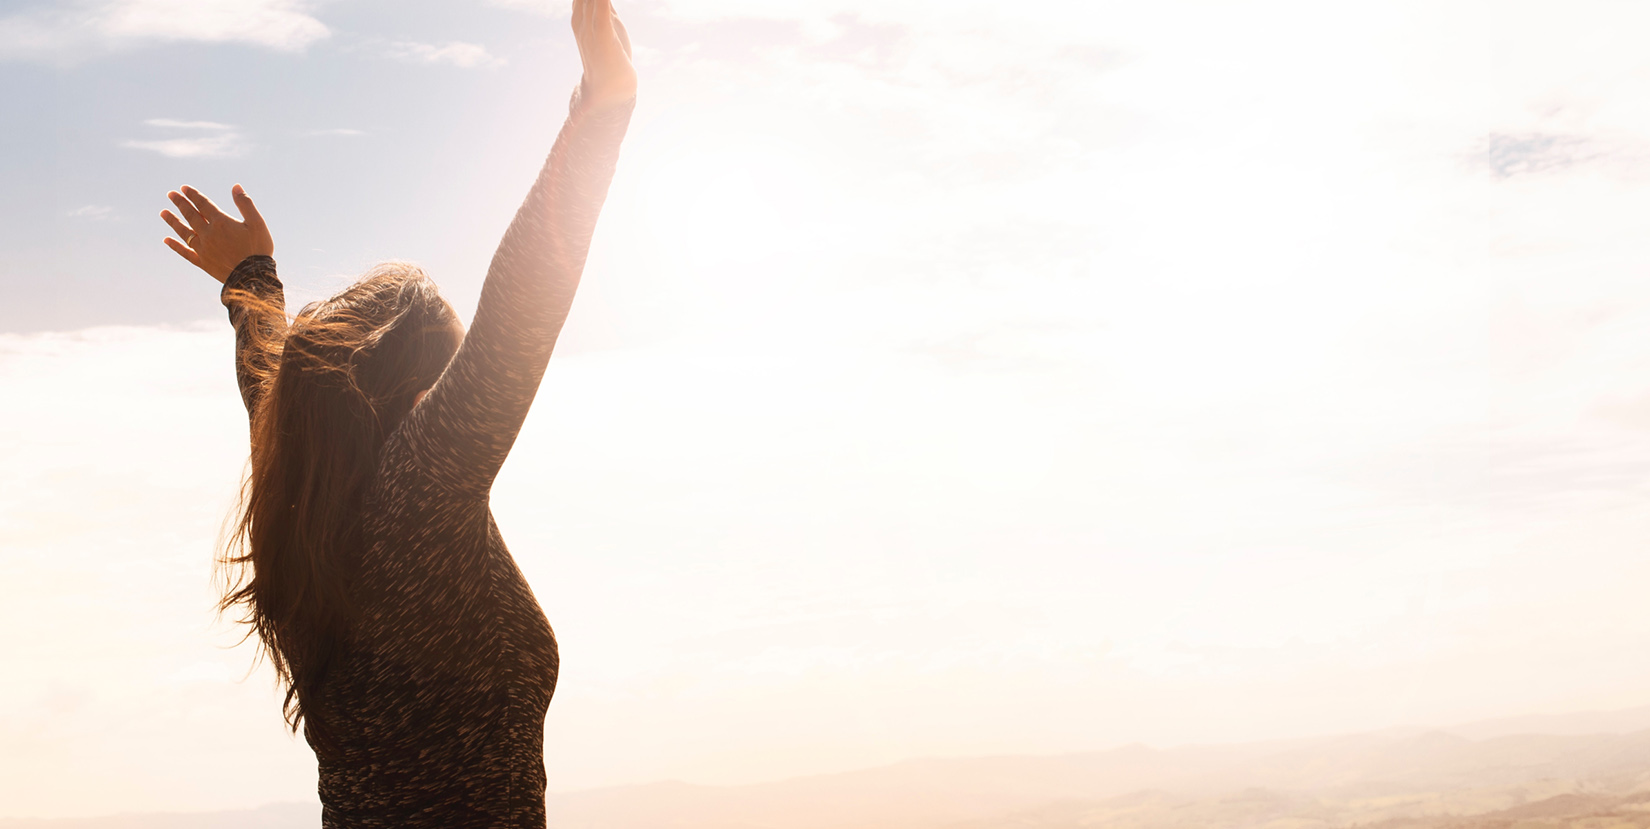 Woman raising her hands in freedom - In the “therapy” world, validation is the process of other’s confirming the validity of emotions, but many don't know how powerful and liberating it can be.